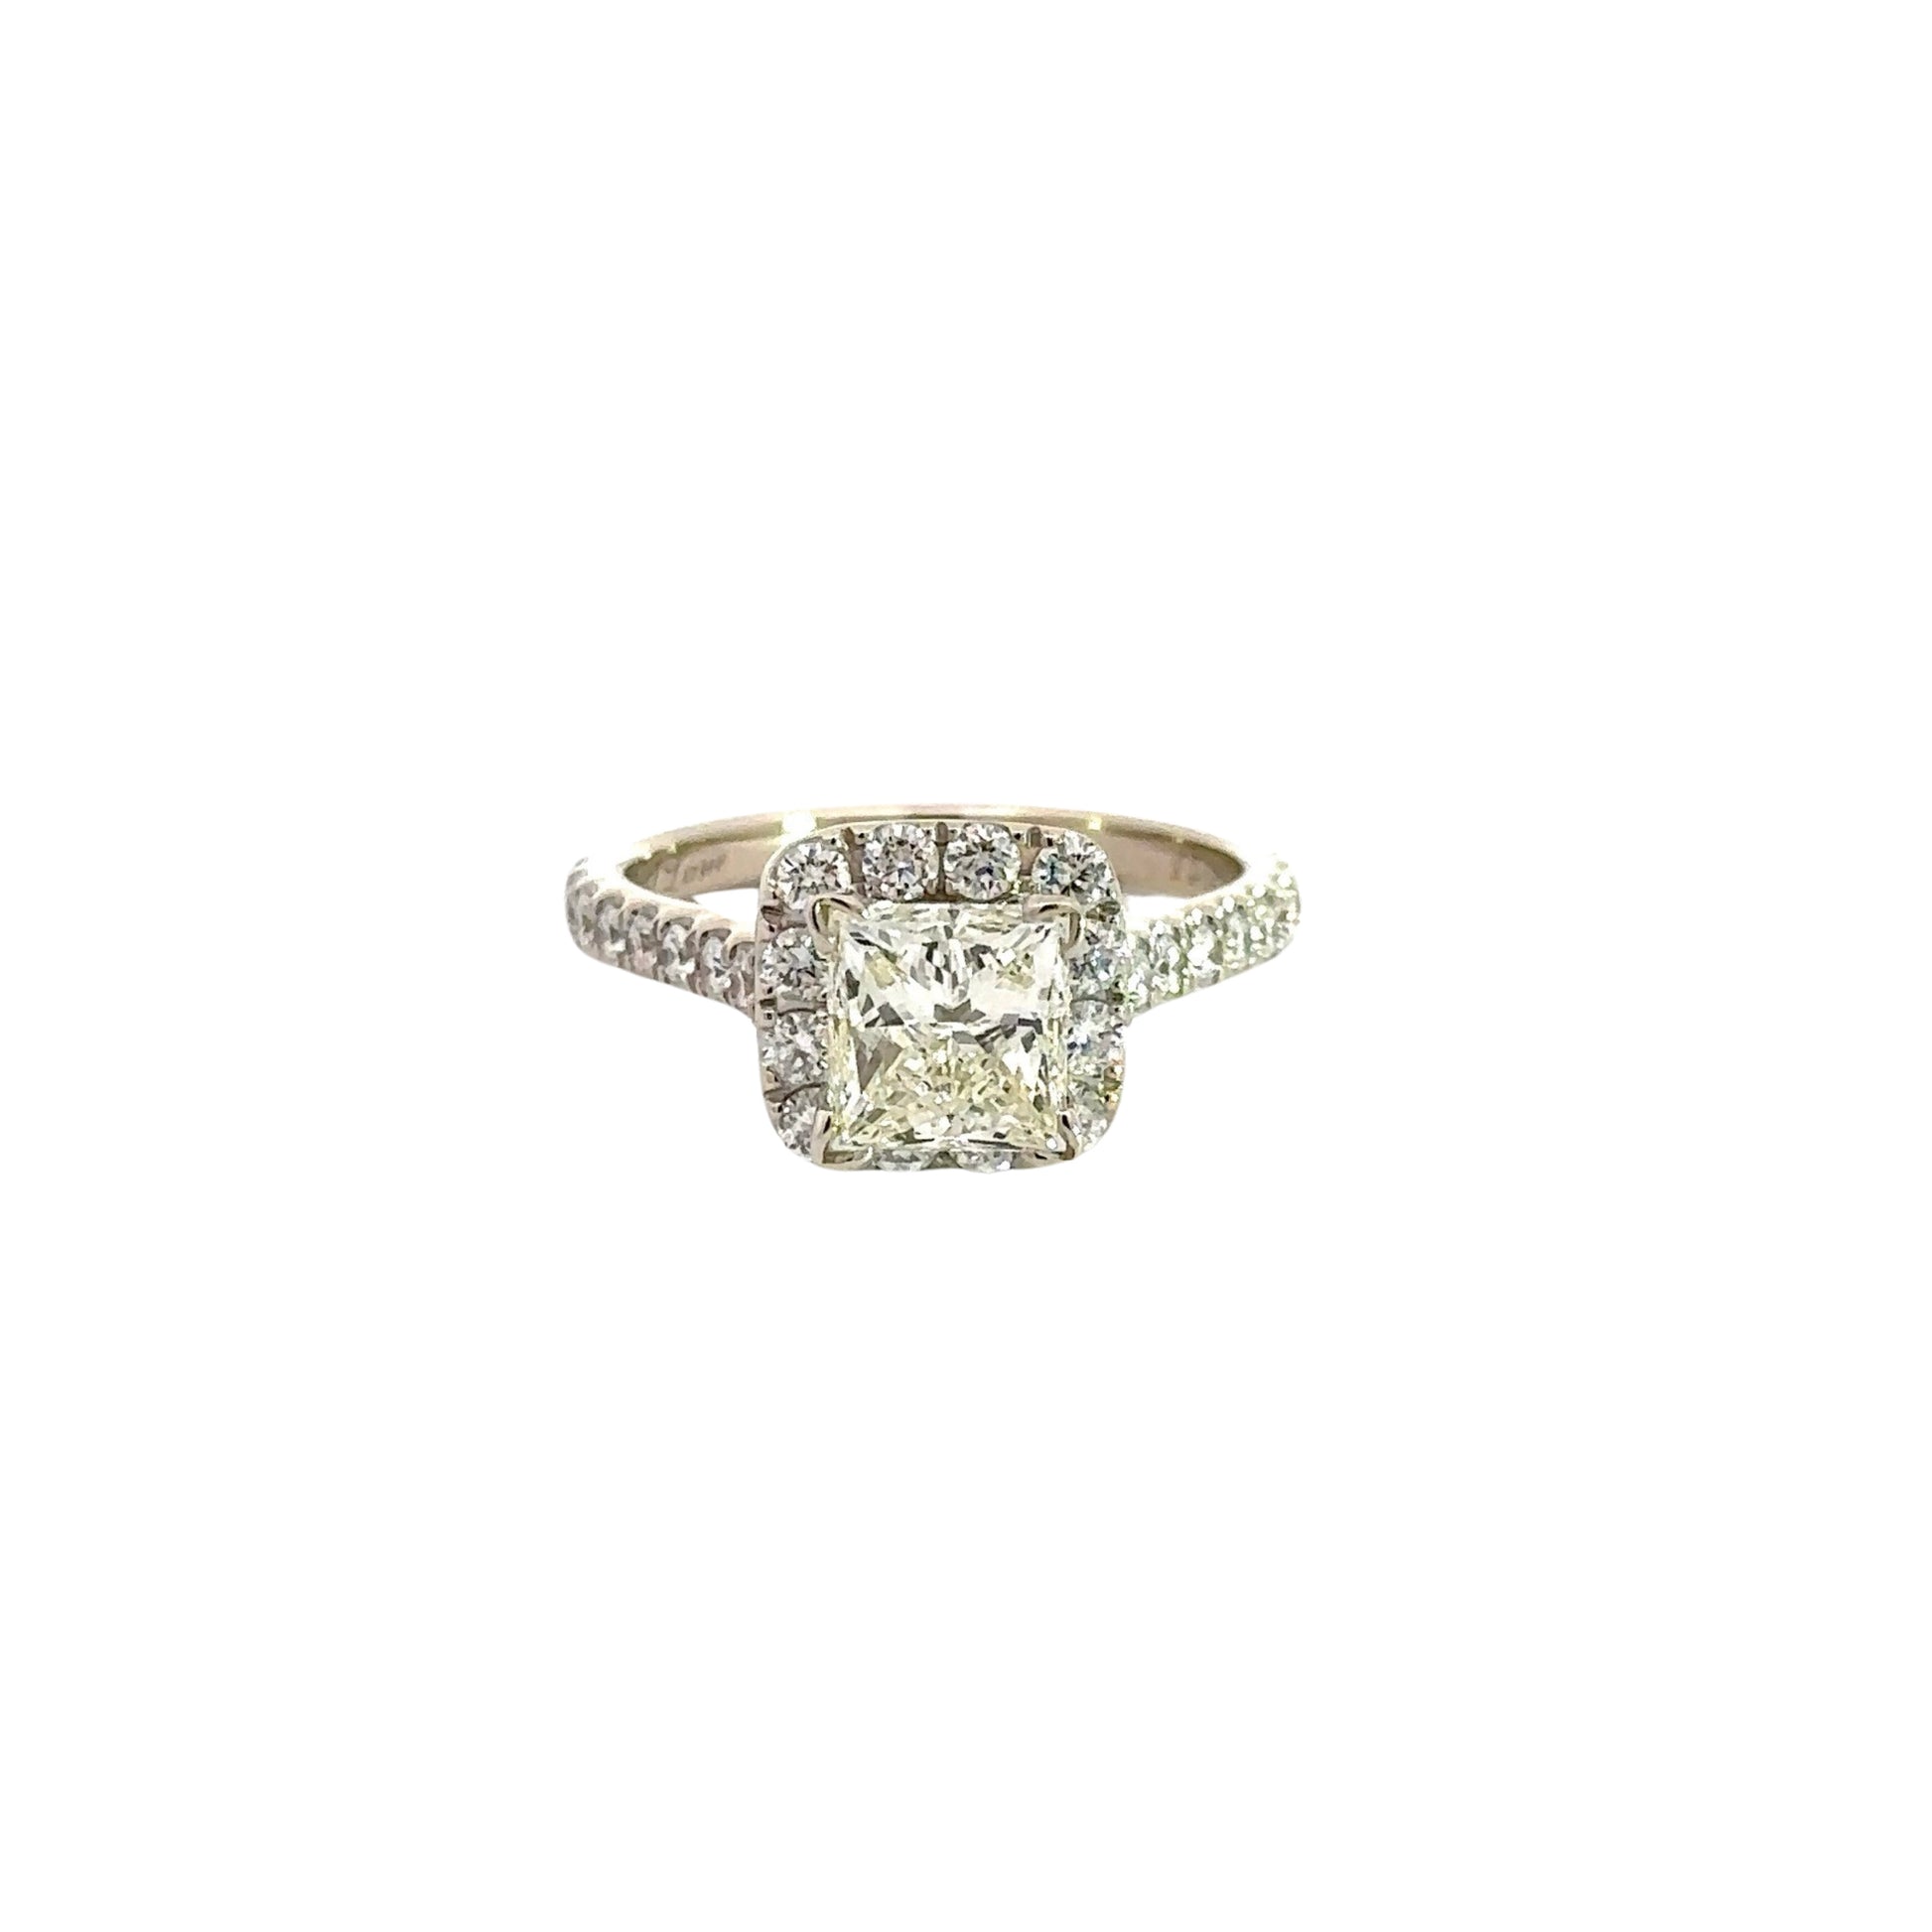 Front of ring with 11 round diamonds around 1.5 carat princess-cut diamond and diamonds on side of band.